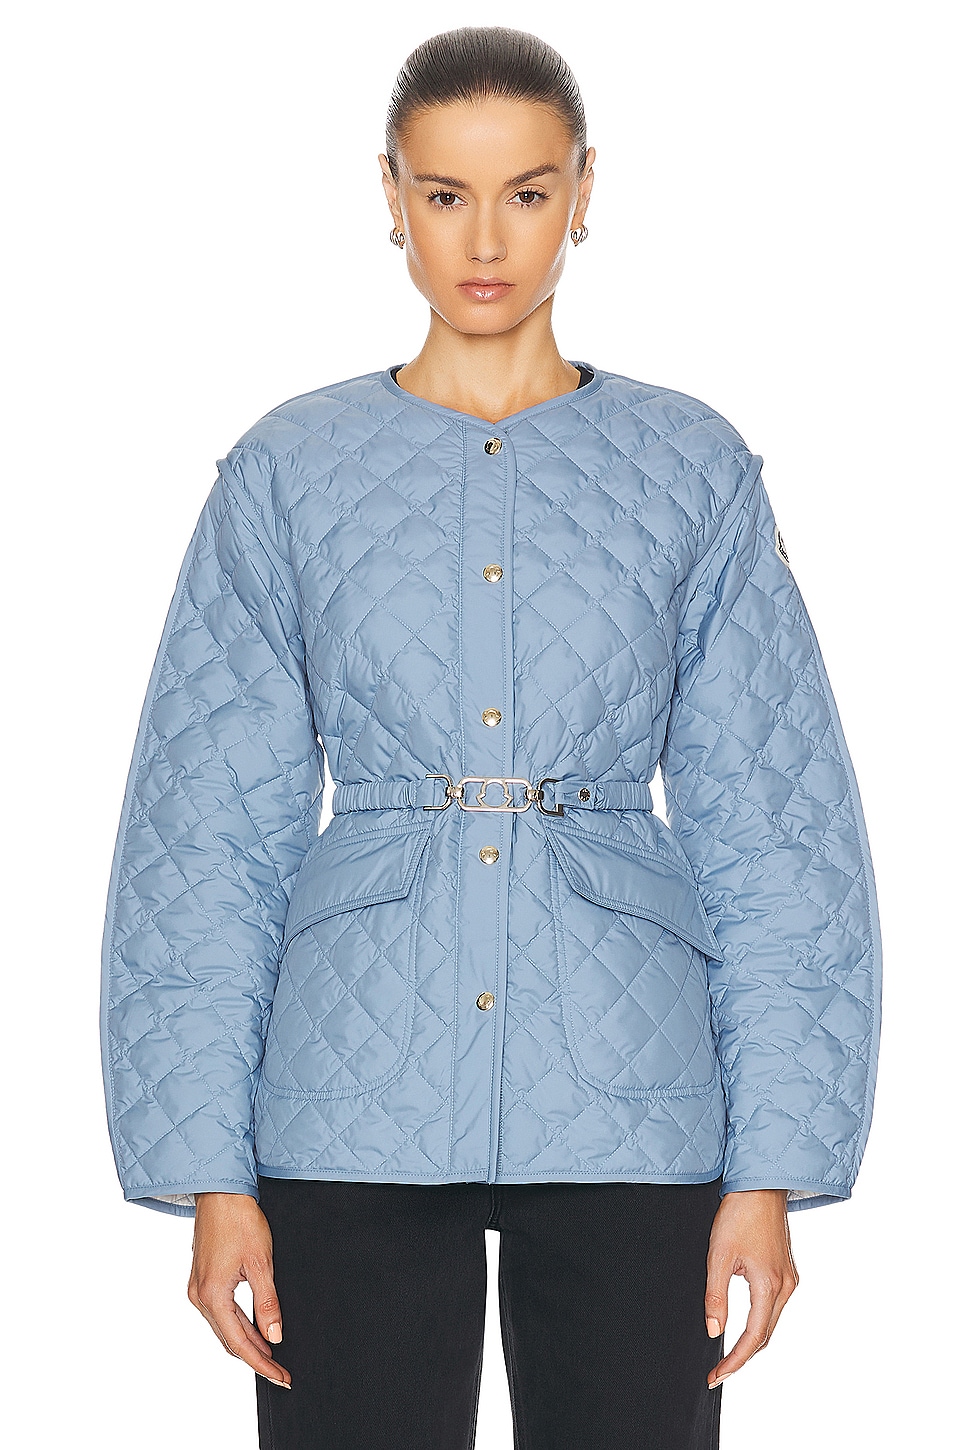 Image 1 of Moncler Corinto Jacket in Blue